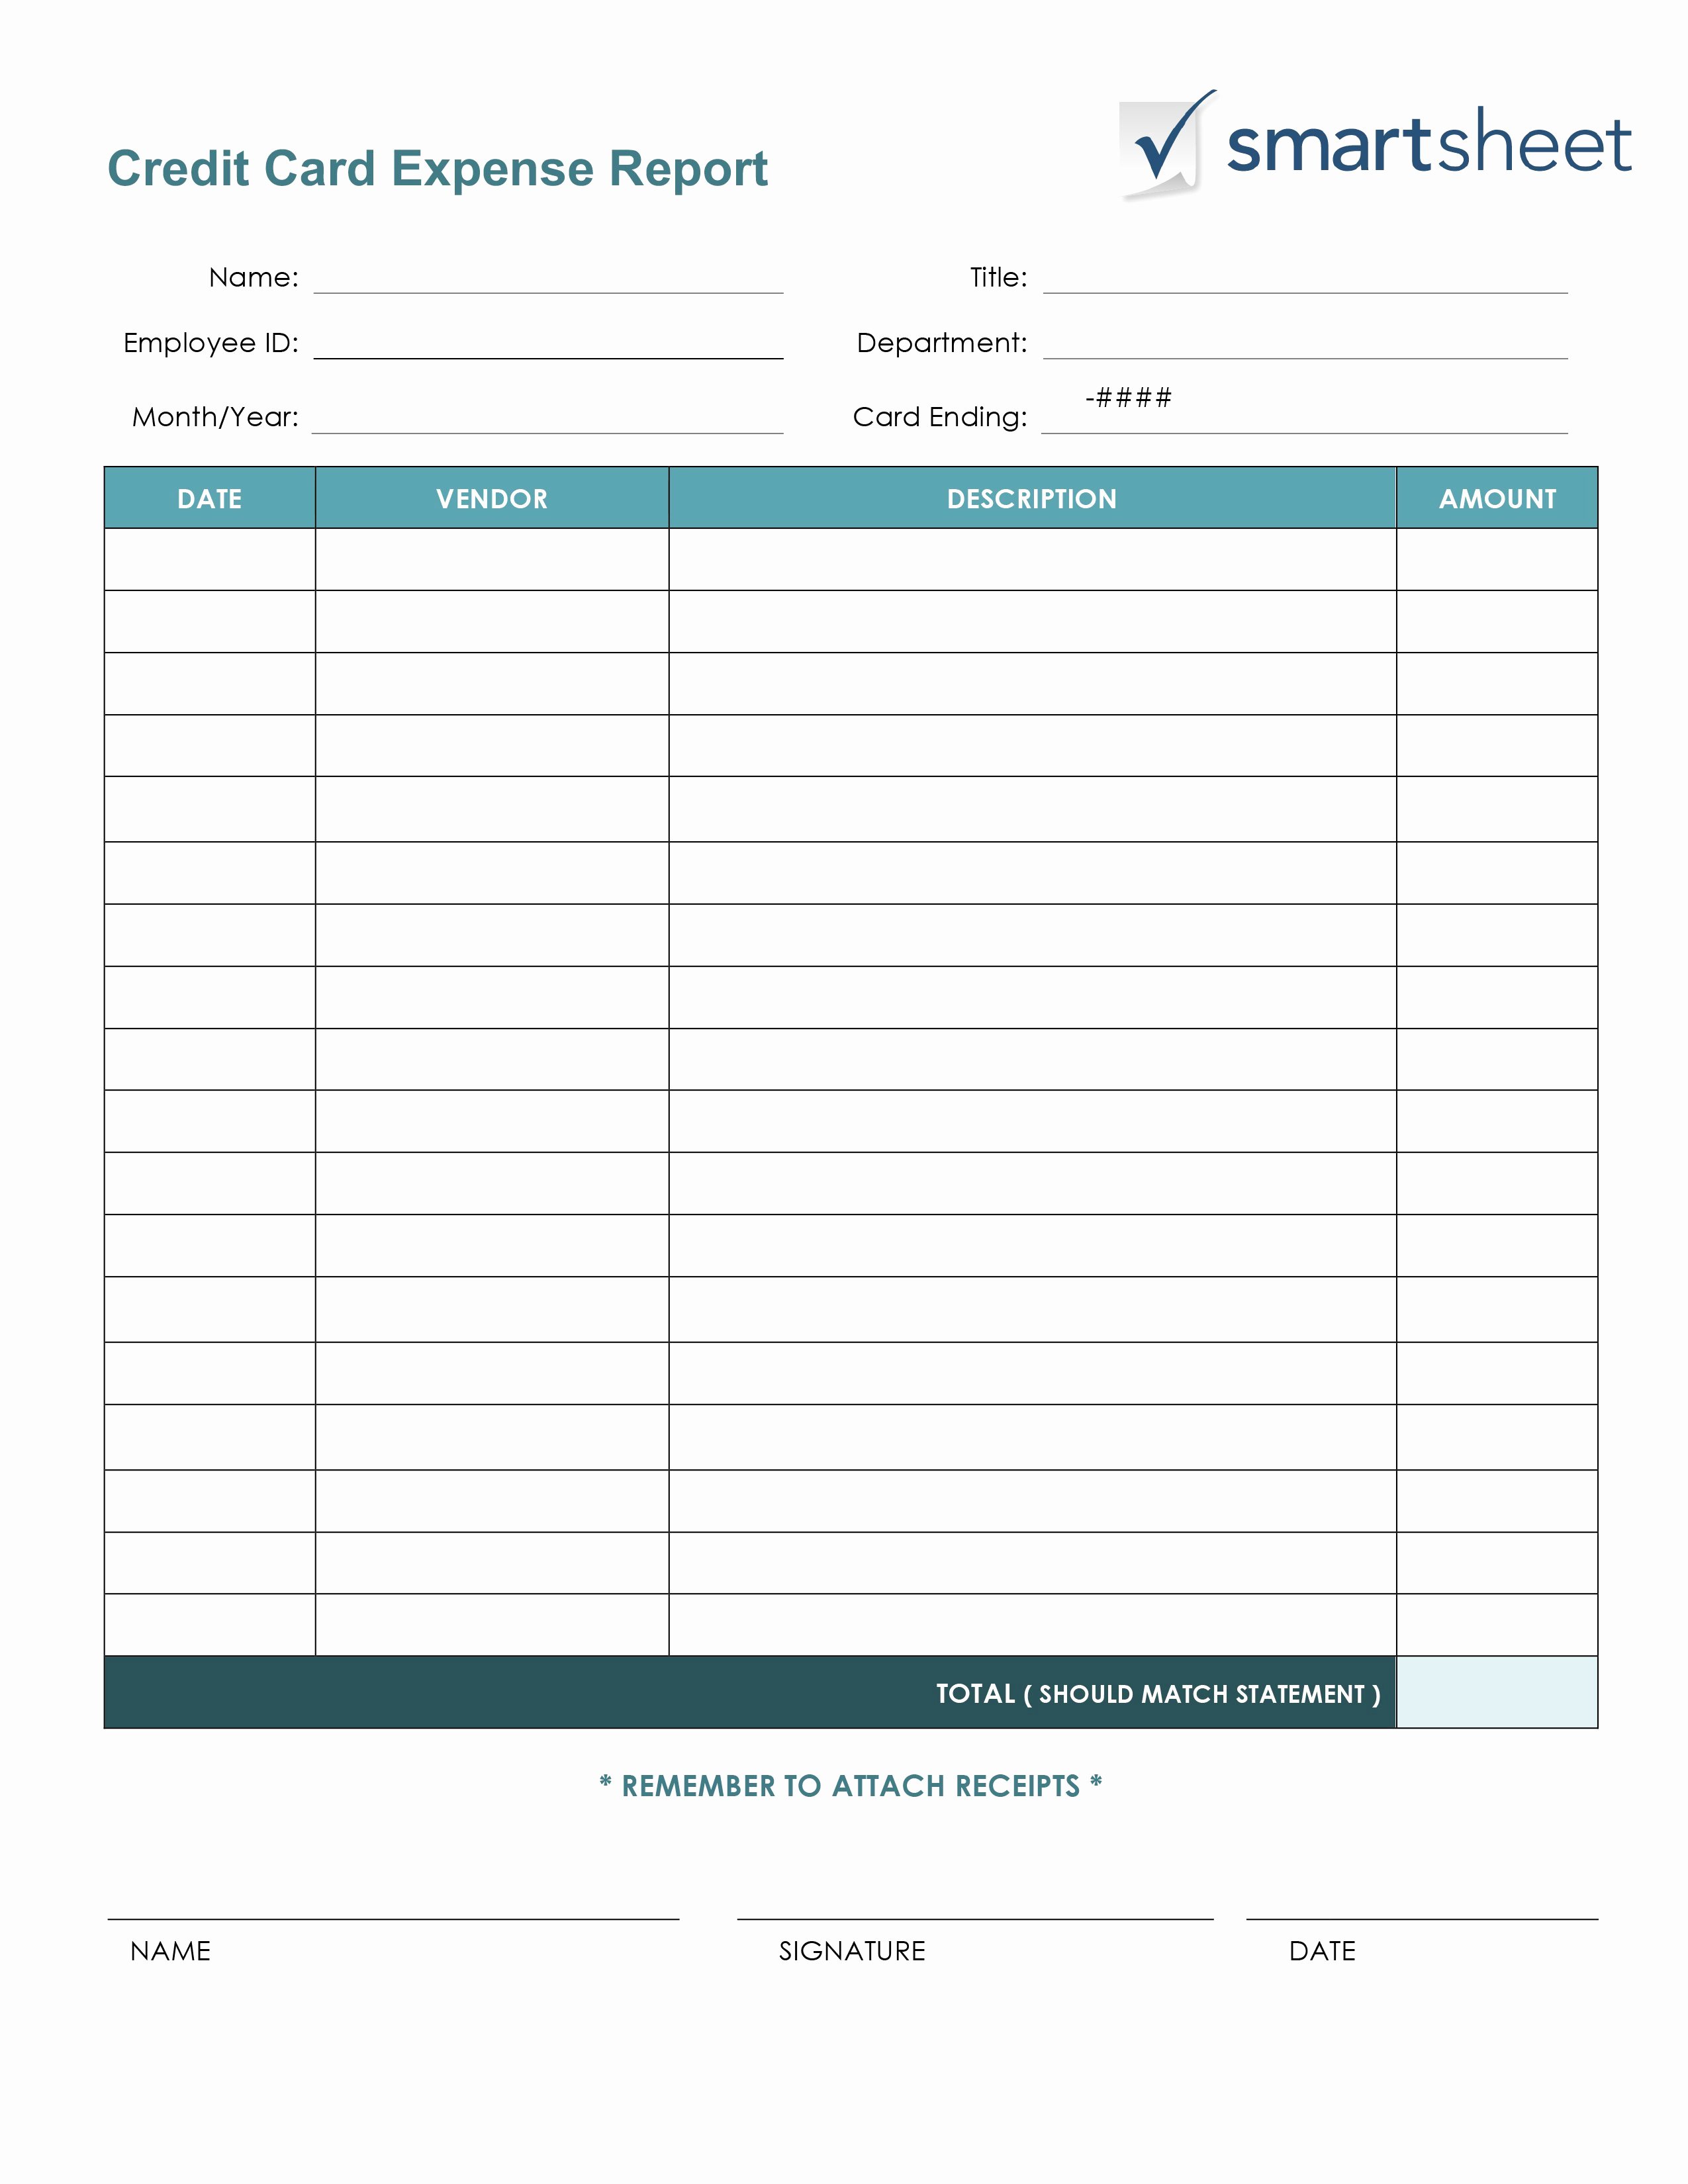 Monthly Expense Report Template Awesome Free Expense Report Templates Smartsheet